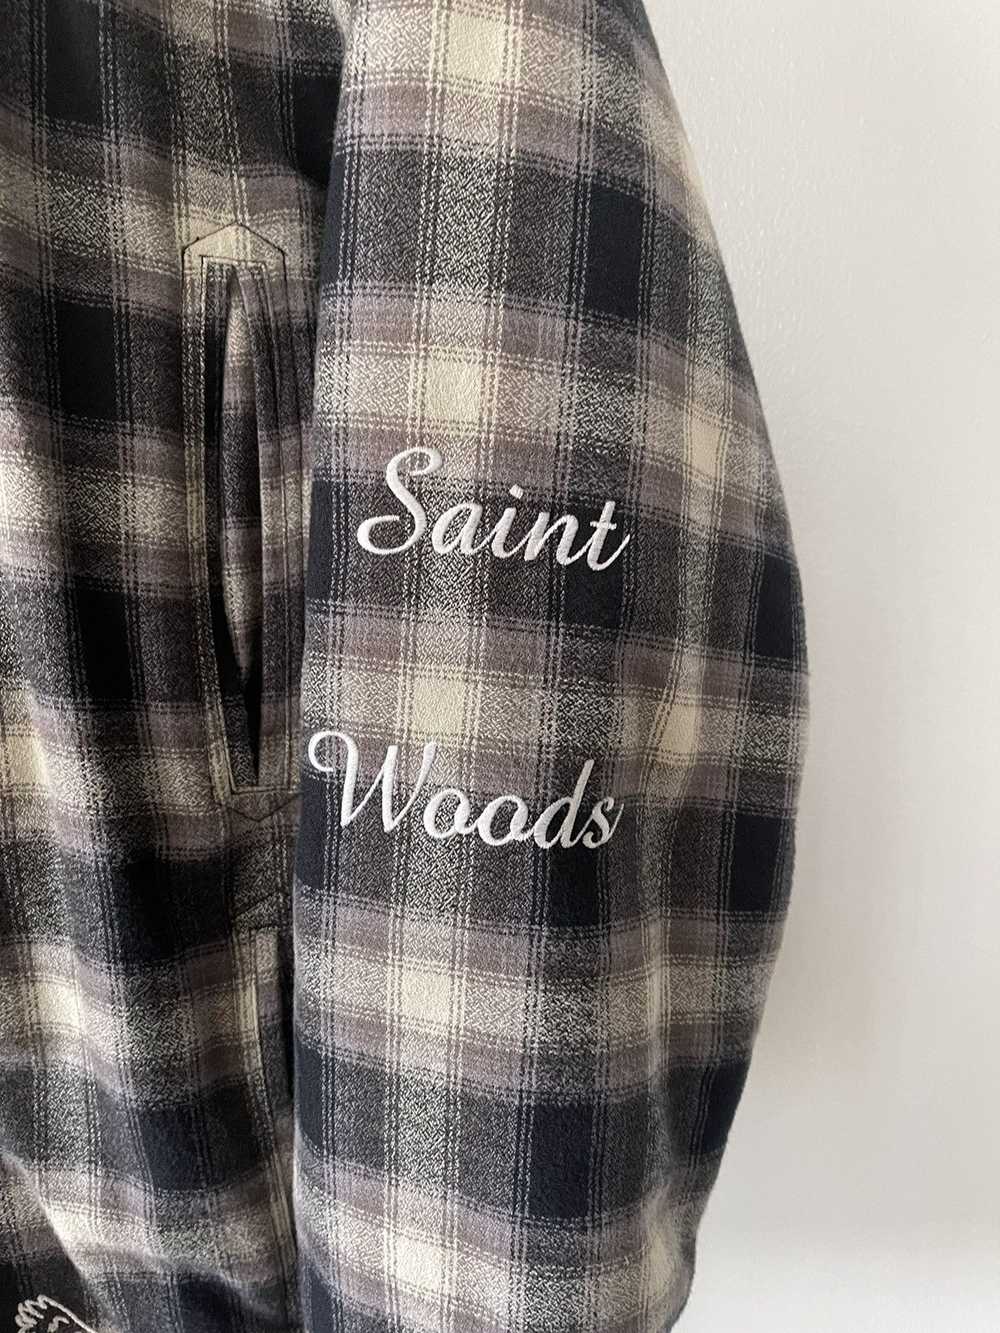 Saintwoods Saintwoods Grey Insulated Flannel Shirt - image 3